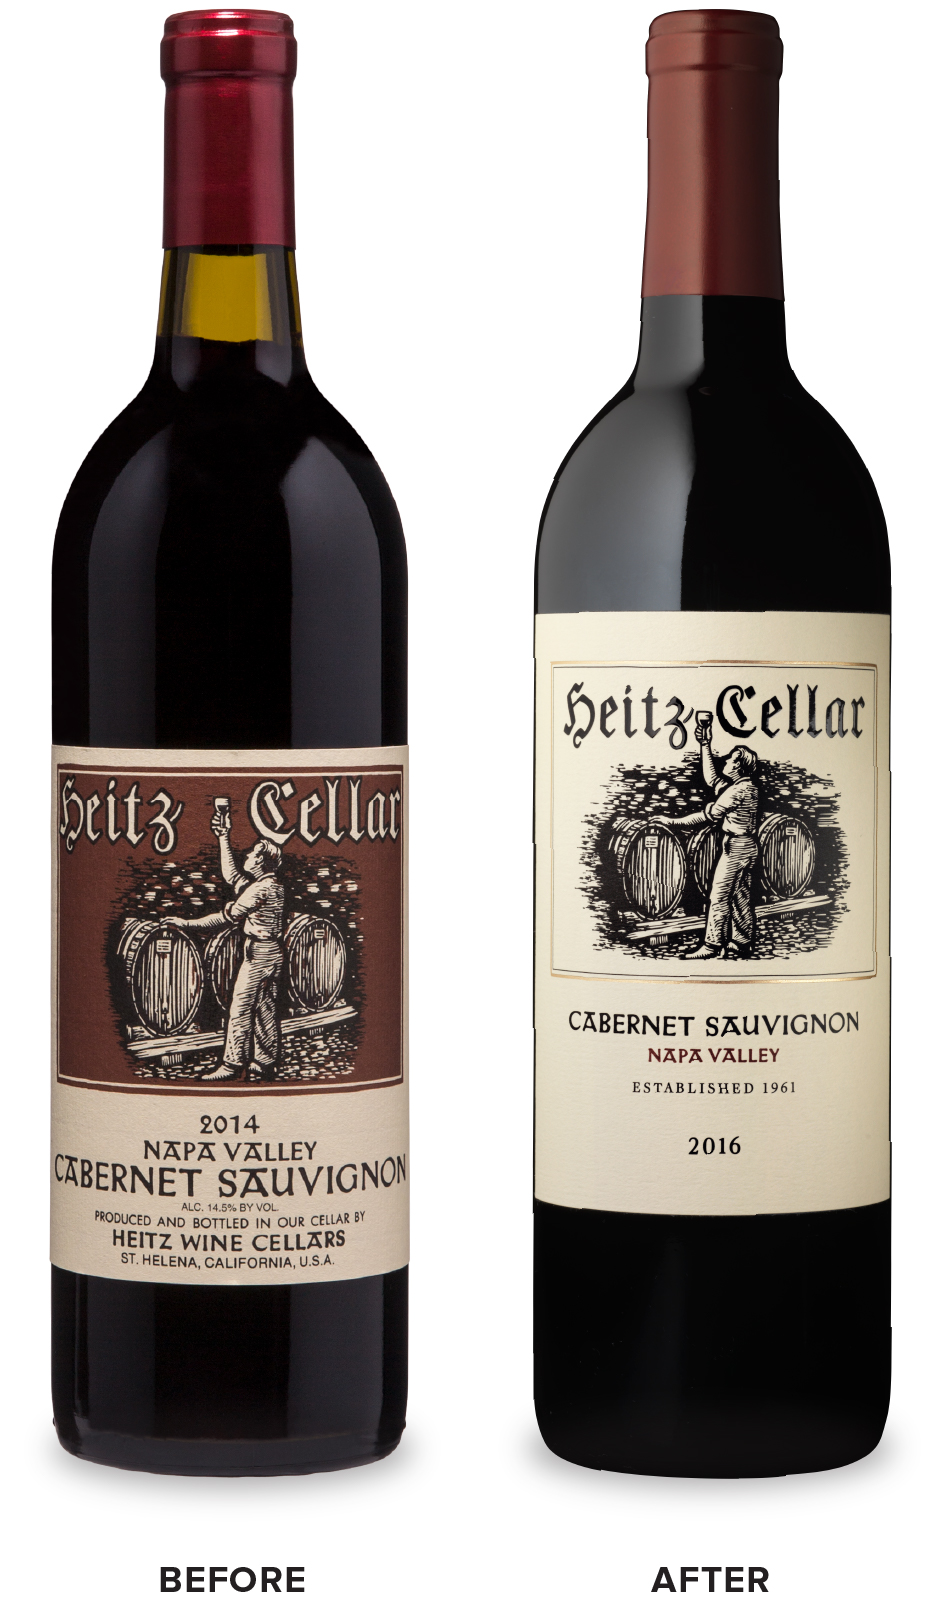 Heitz Cellar Core Red Wine Packaging Before Redesign on Left & After on Right